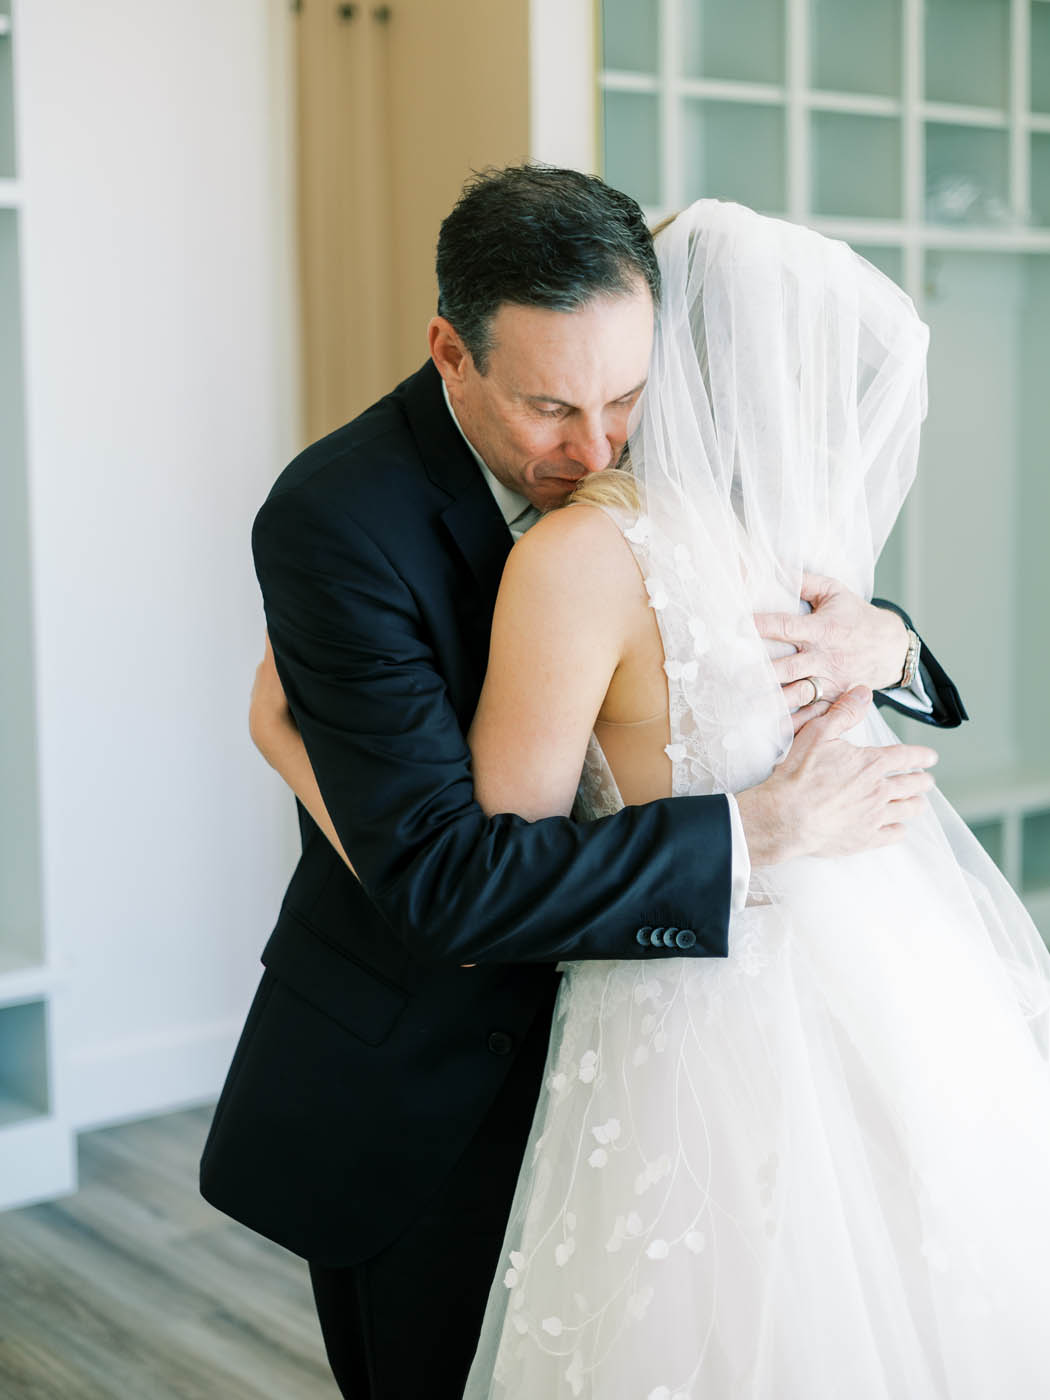 the bride and her father embrace as he sees her for the first time